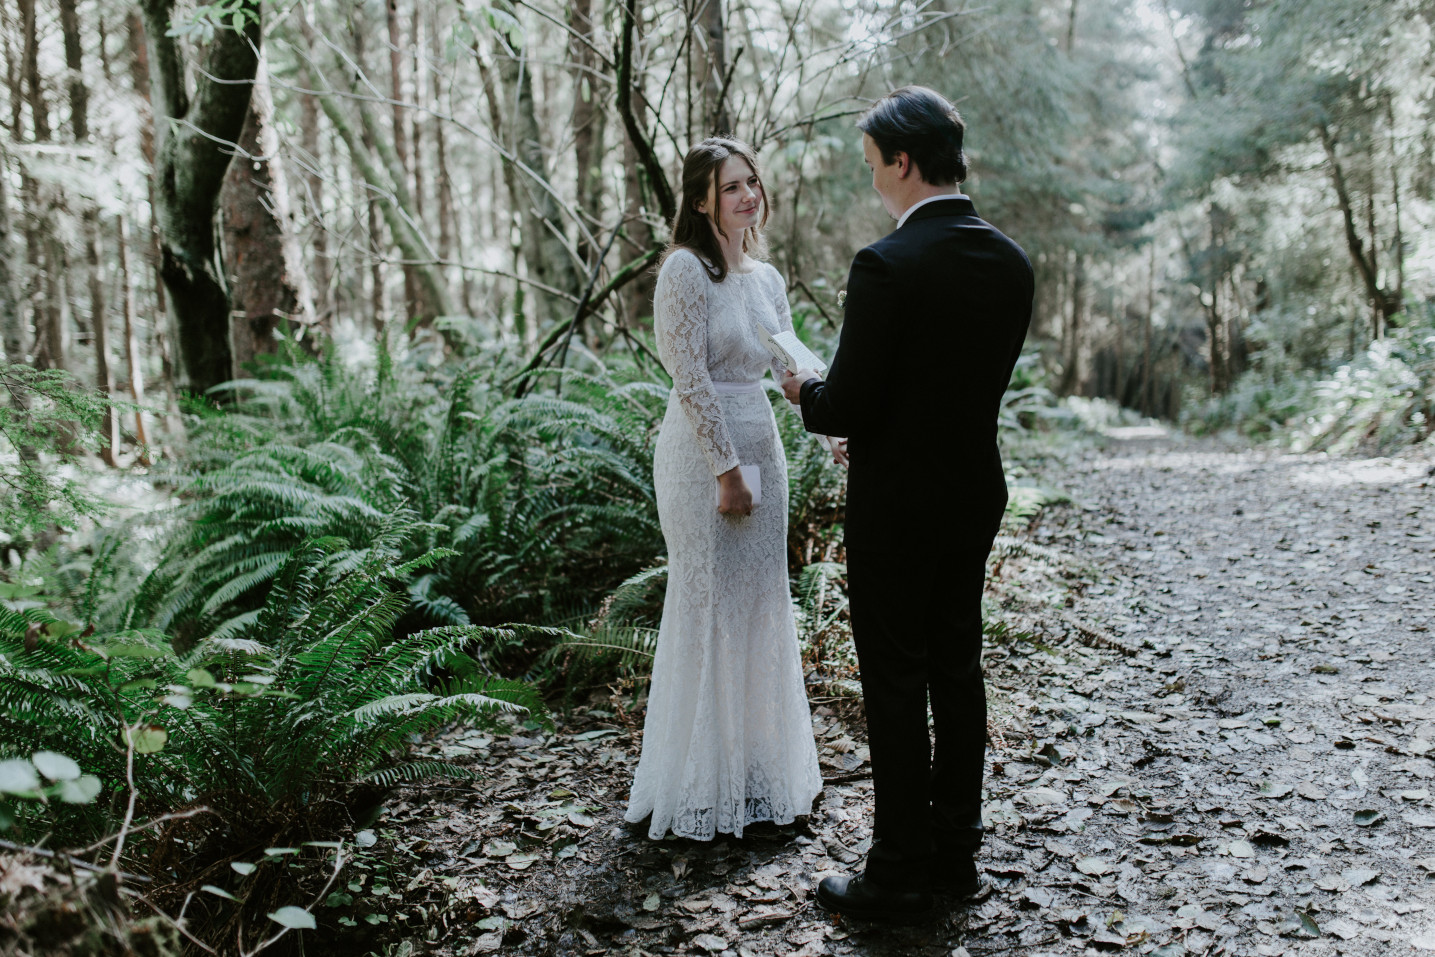 Vlad reads his vows to Nicole during their elopement. Elopement wedding photography at Cannon Beach by Sienna Plus Josh.